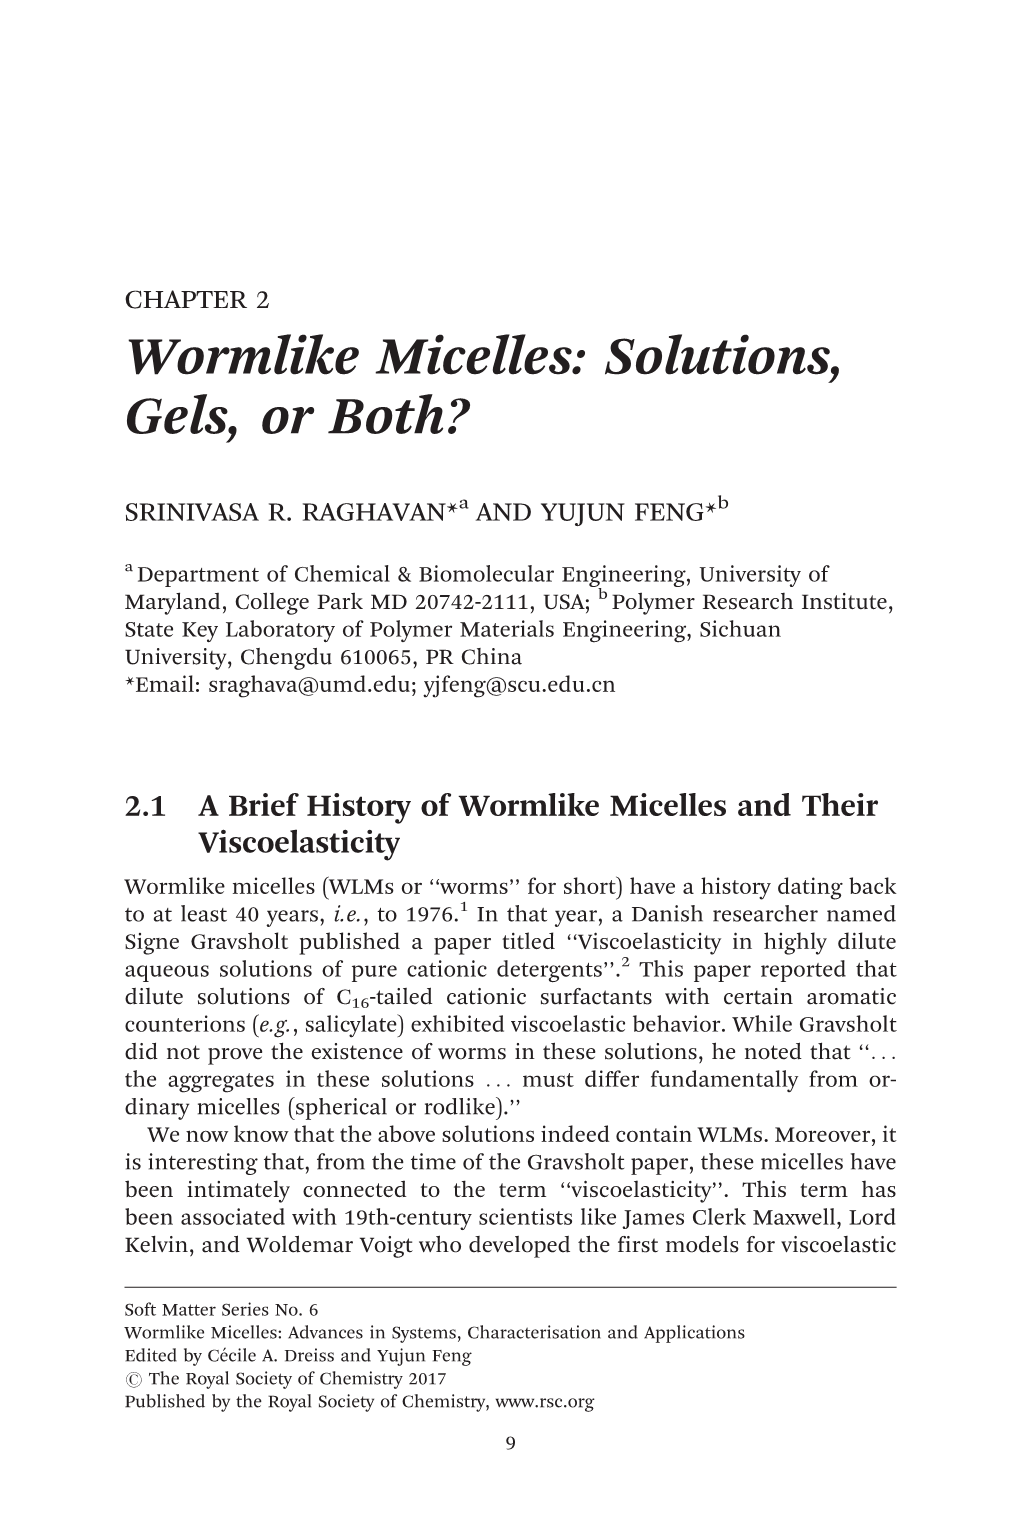 Wormlike Micelles: Solutions, Gels, Or Both?